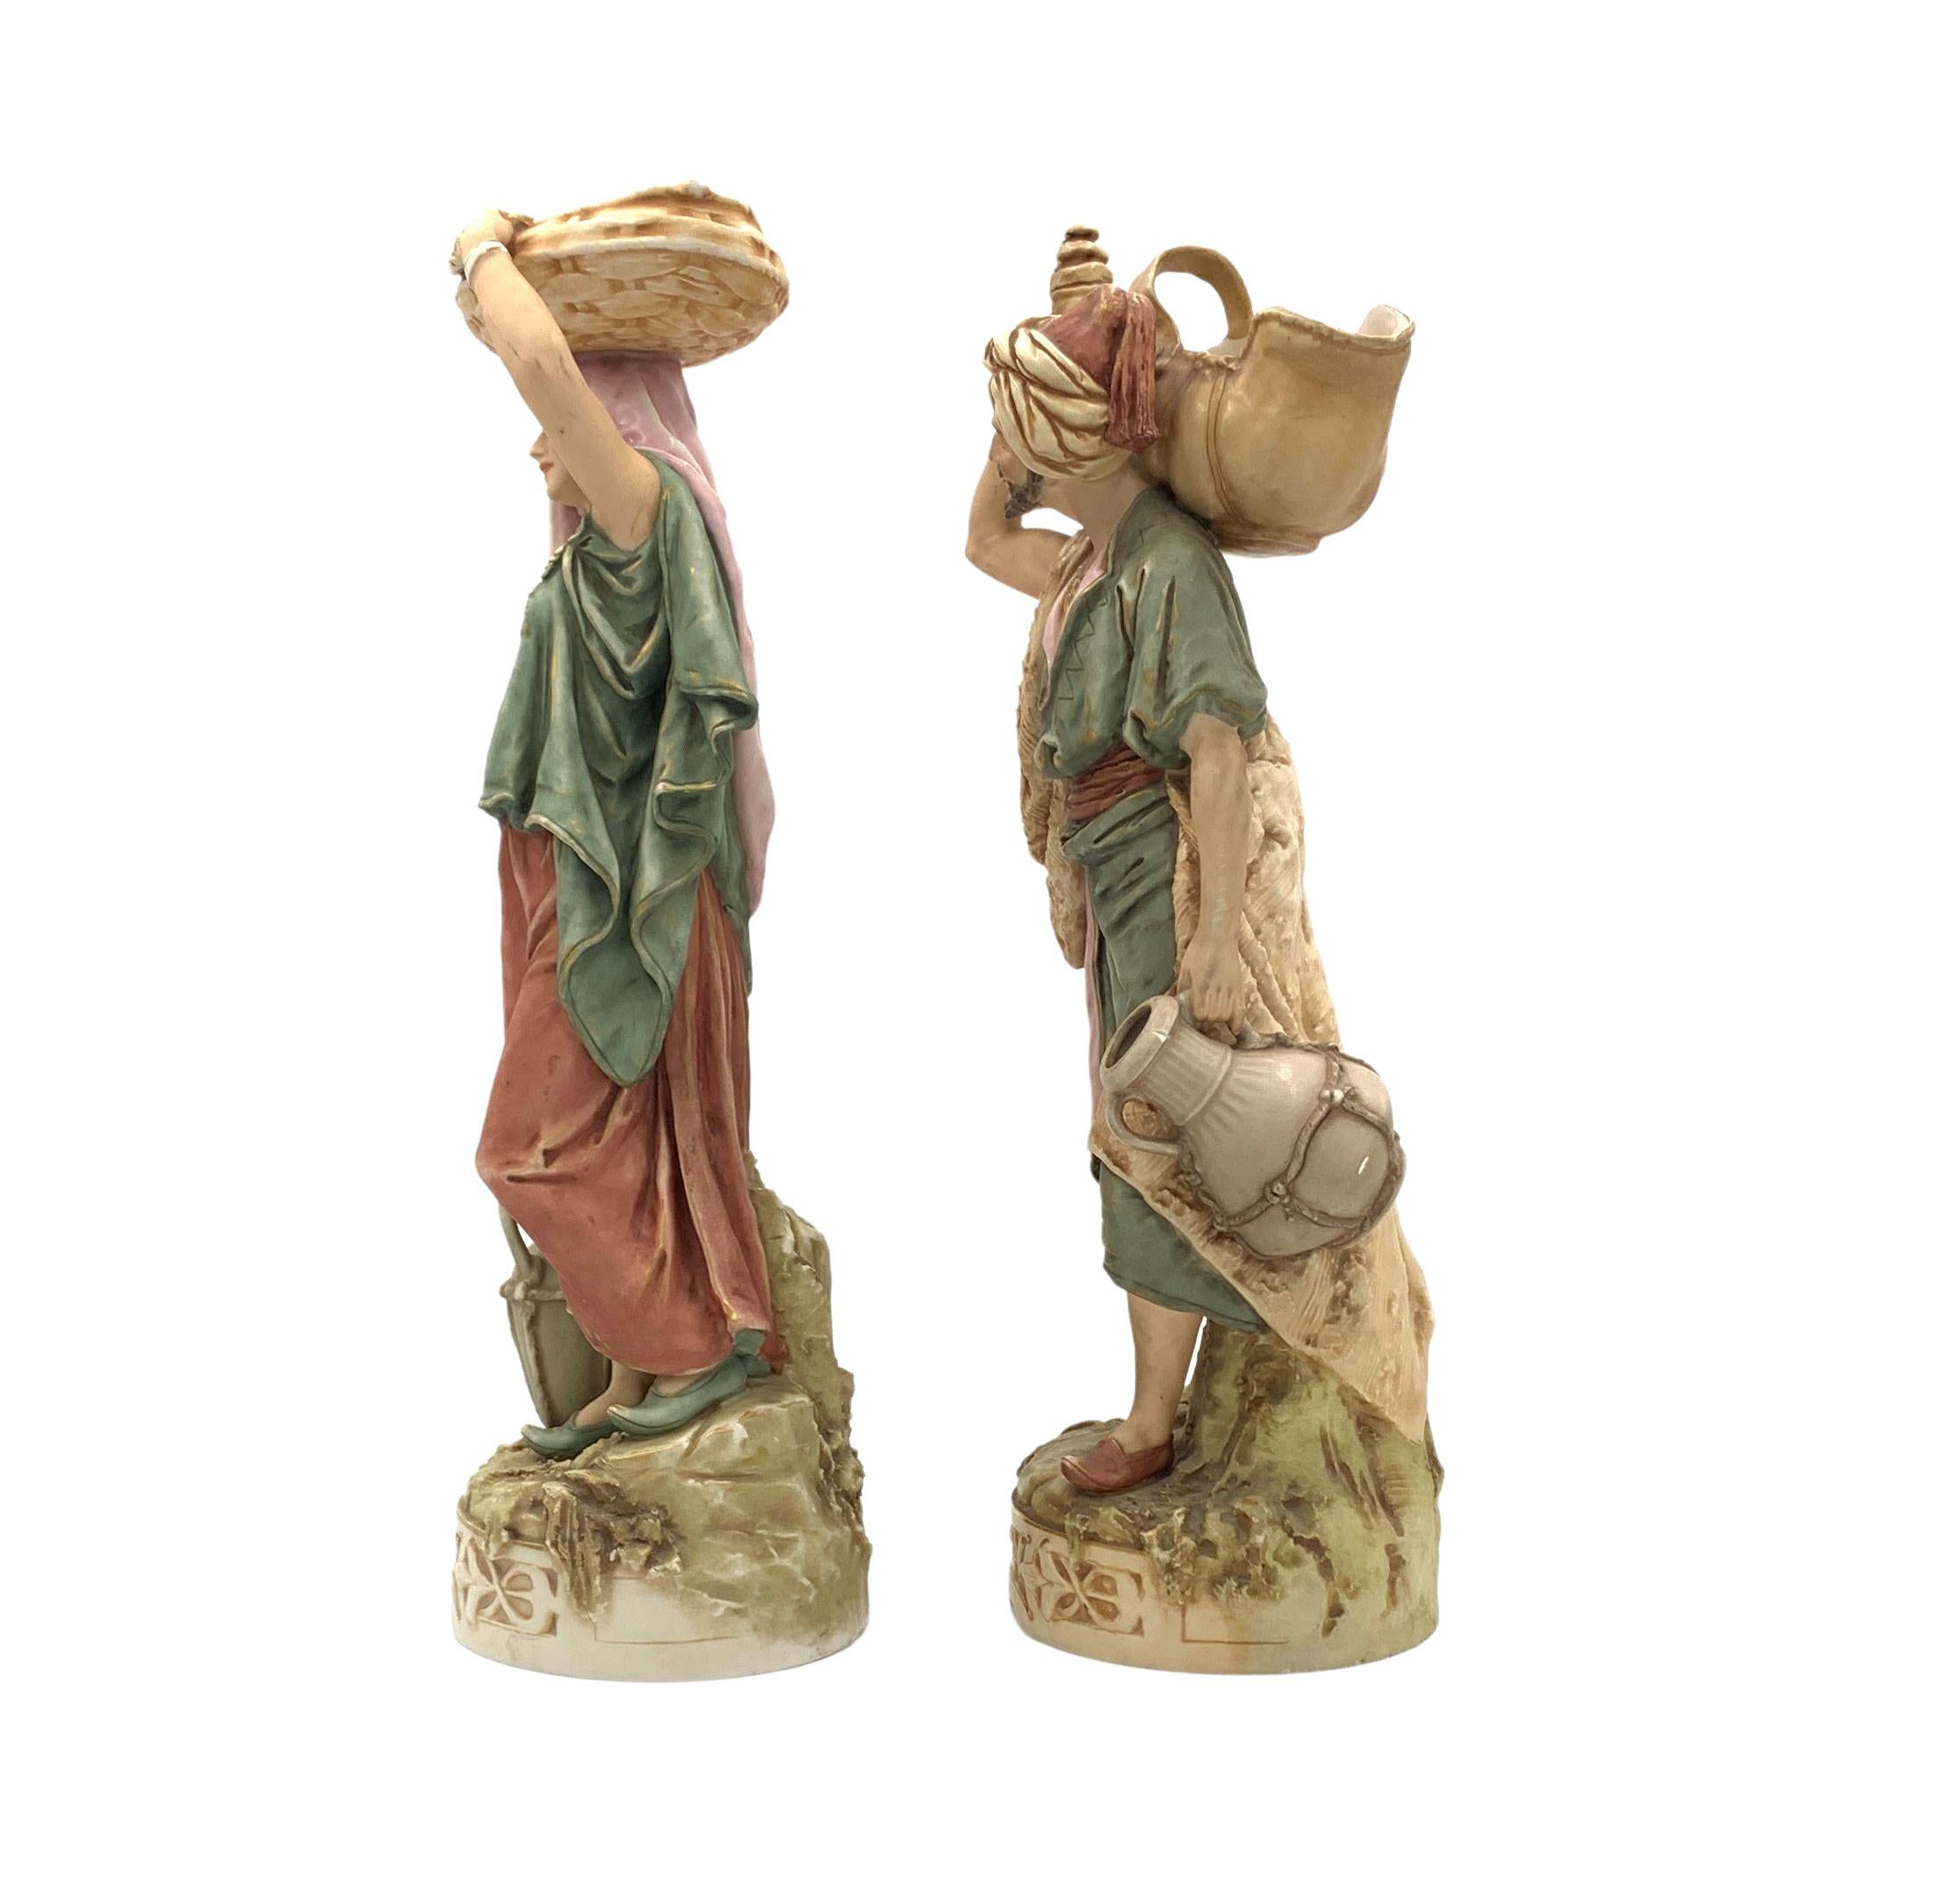 Pair Of Royal Dux Bohemia Porcelain Figures of an eastern water bearer and his companion, A fine bohemian royal dux porcelain figure, this pair was made in Czechoslovakia between 1900-1918, He is carrying a horn-shaped conical water vessel over his